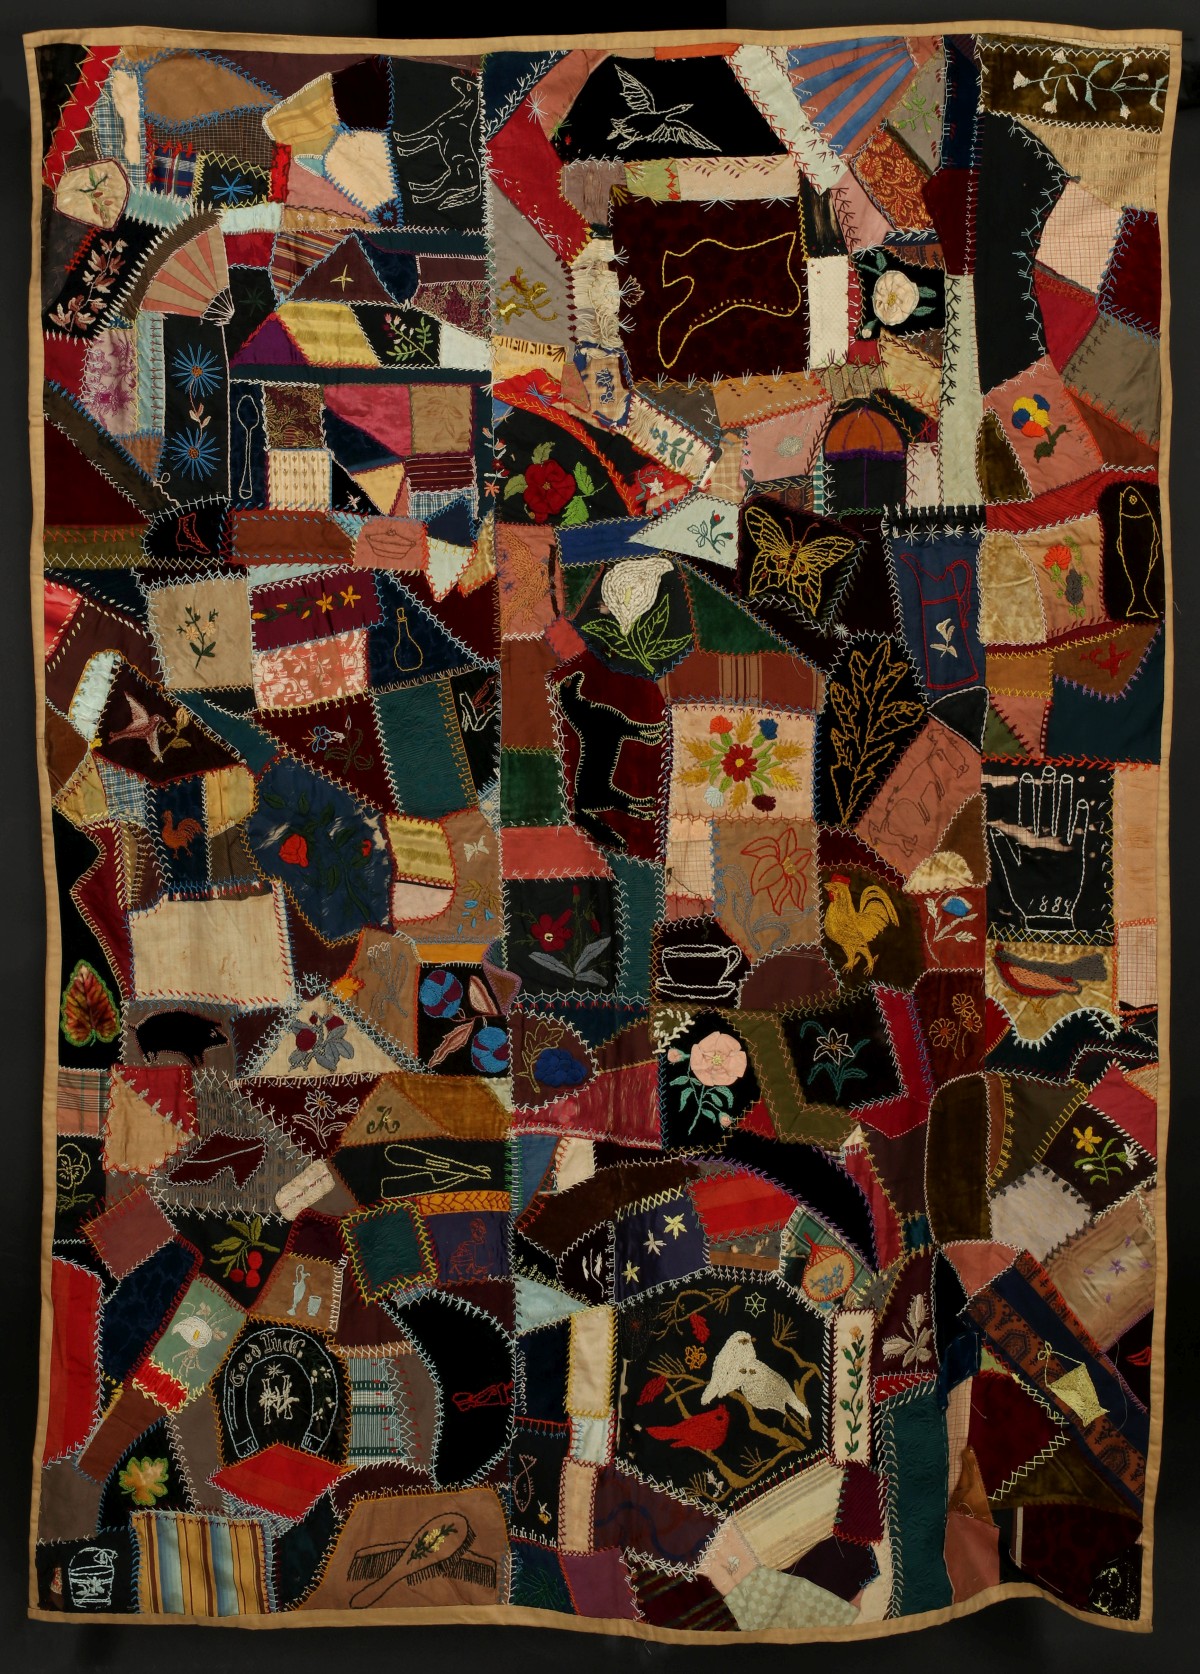 A ELABORATELY EMBROIDERED CRAZY QUILT DATED 1884